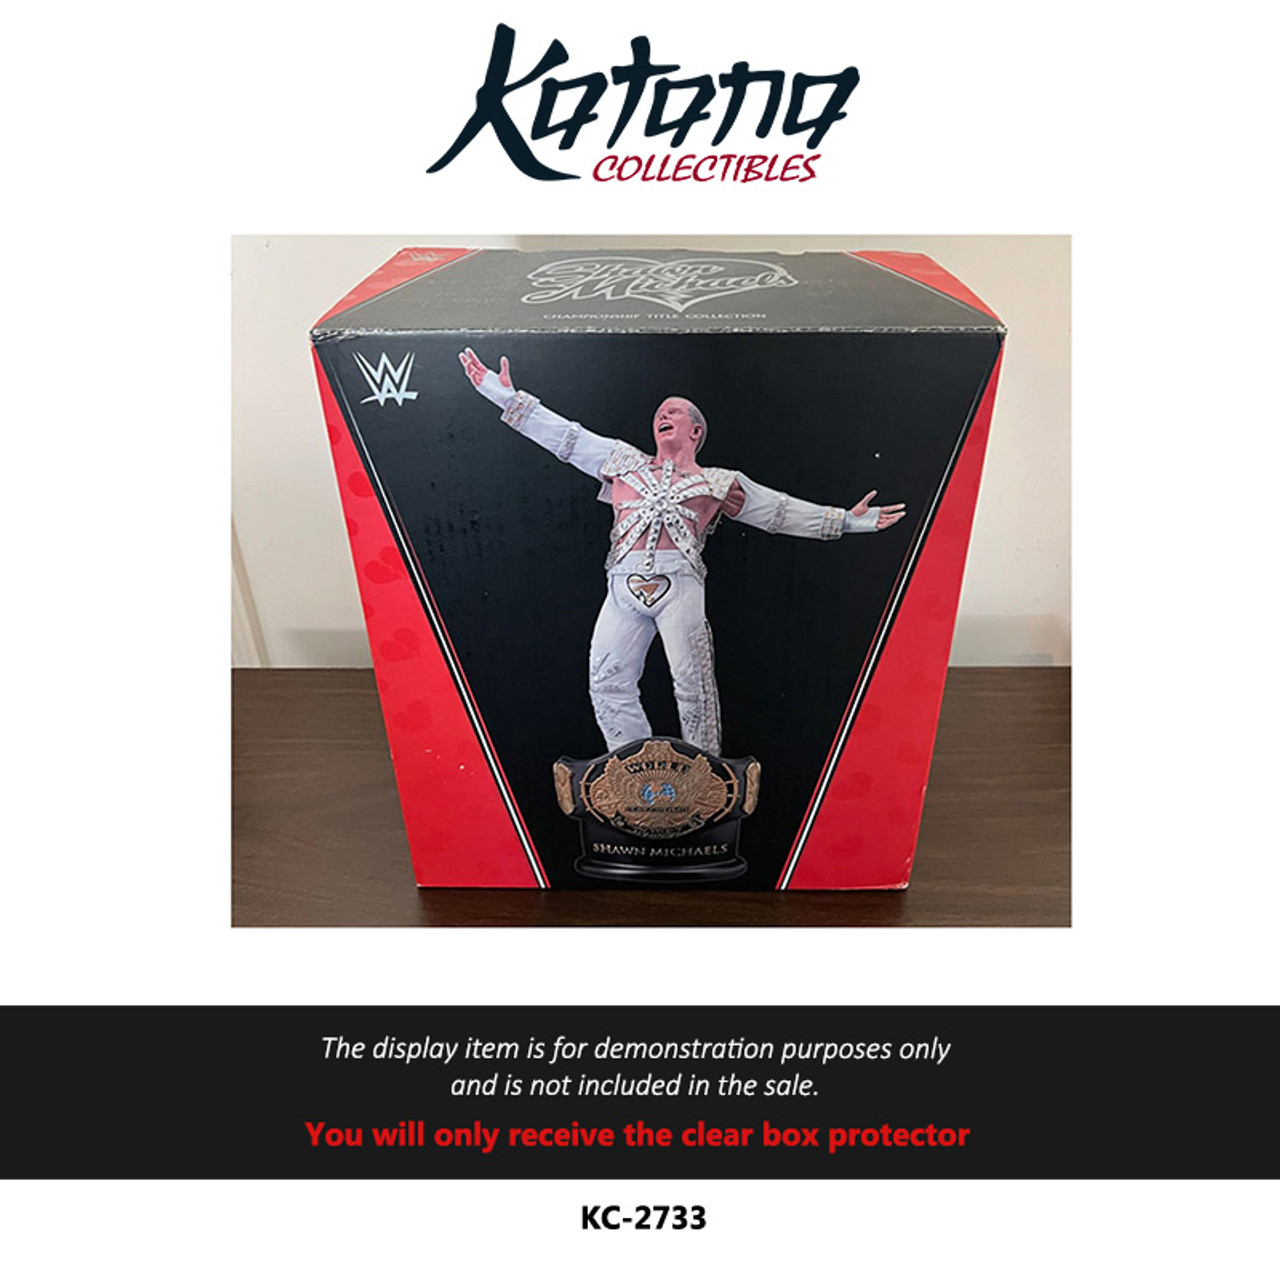 Katana Collectibles Protector For WWE Championship Title Collection Shawn Michaels Statue